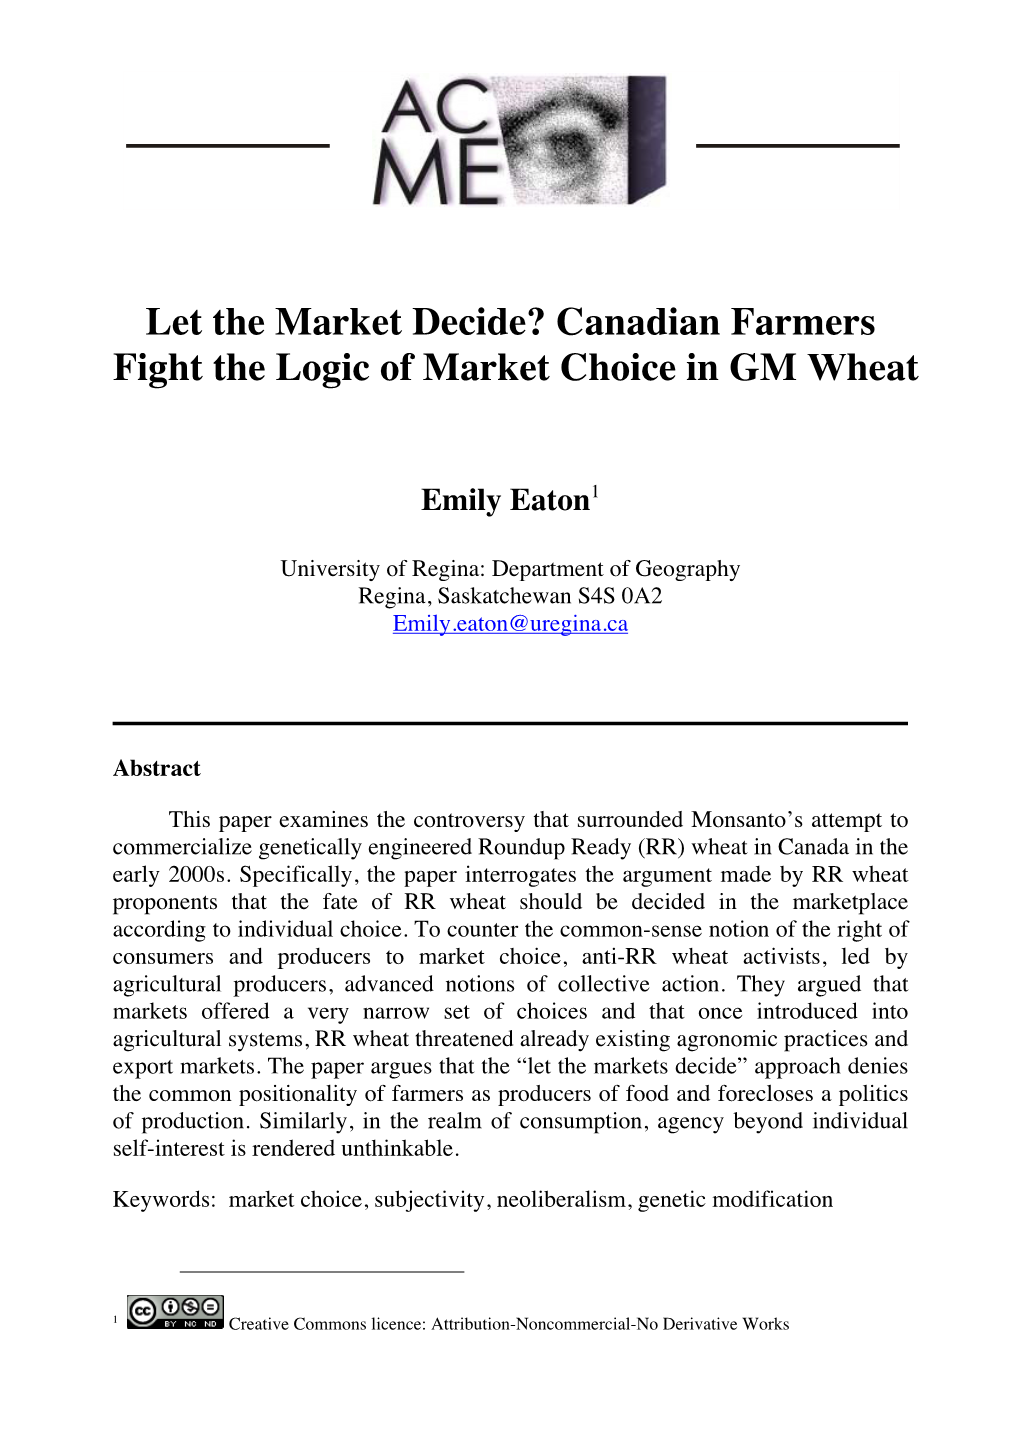 Canadian Farmers Fight the Logic of Market Choice in GM Wheat